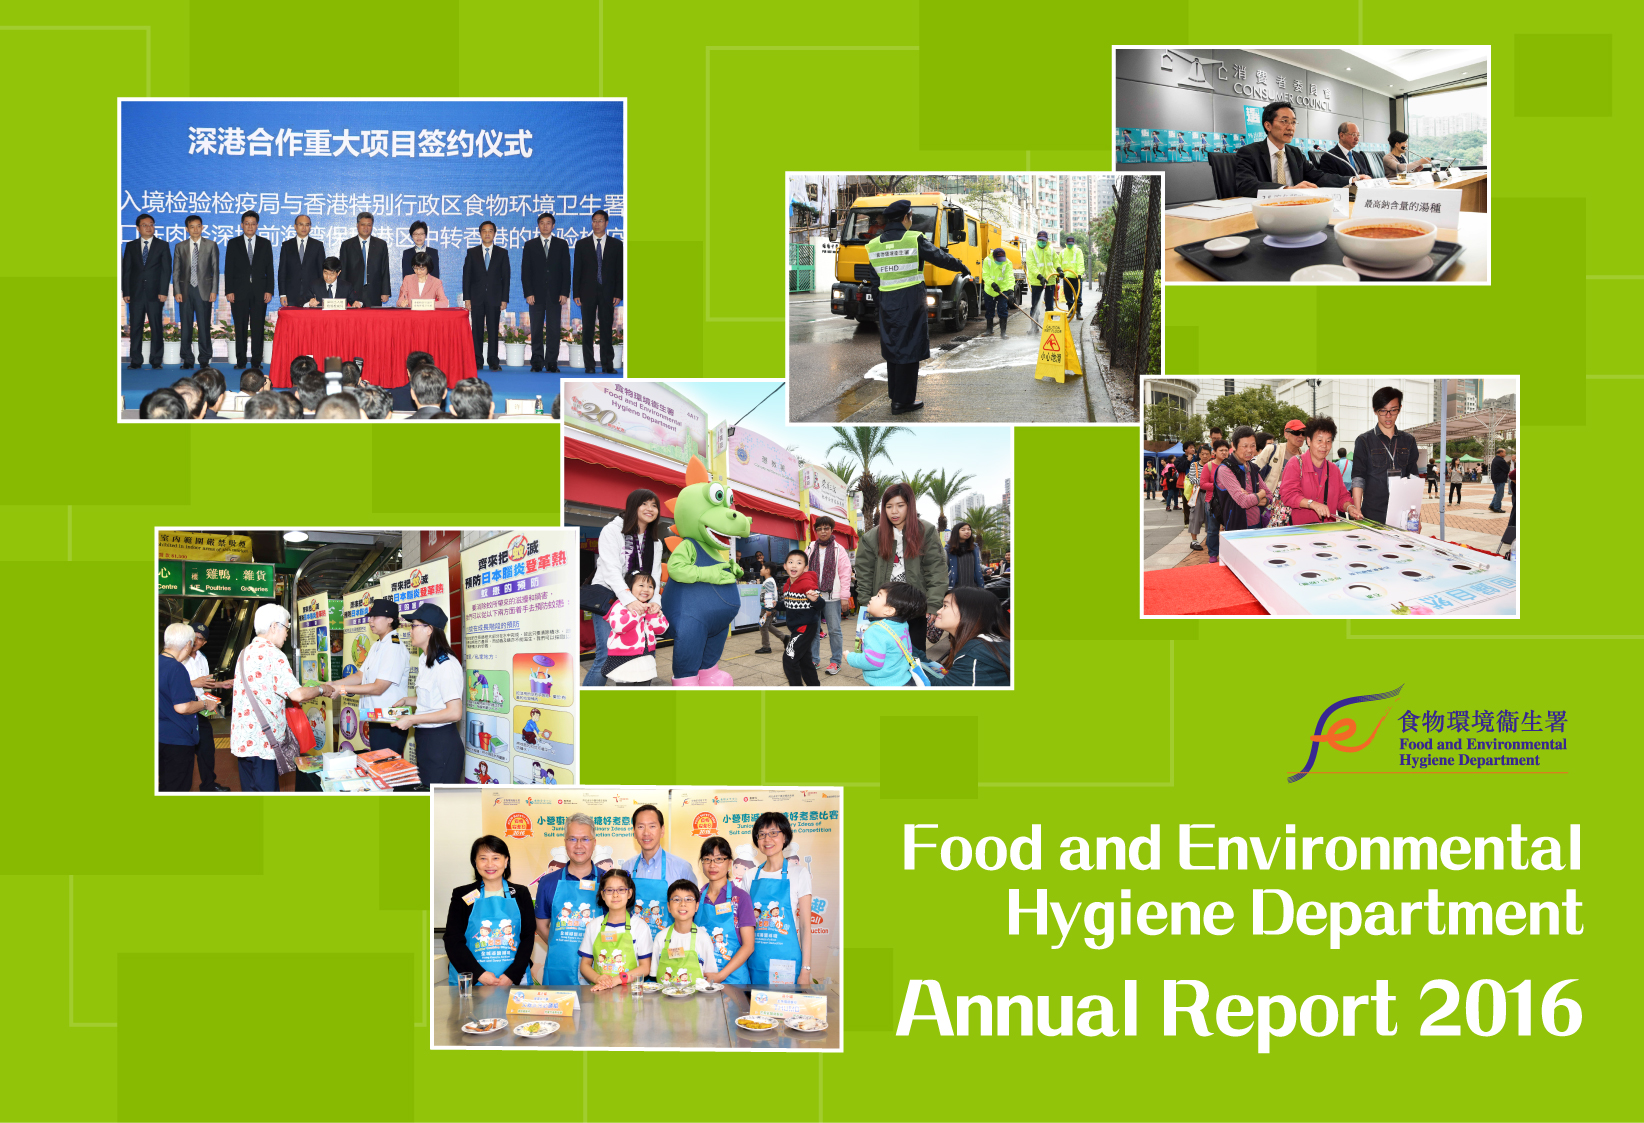 Cover Page of FEHD Annual Report 2016